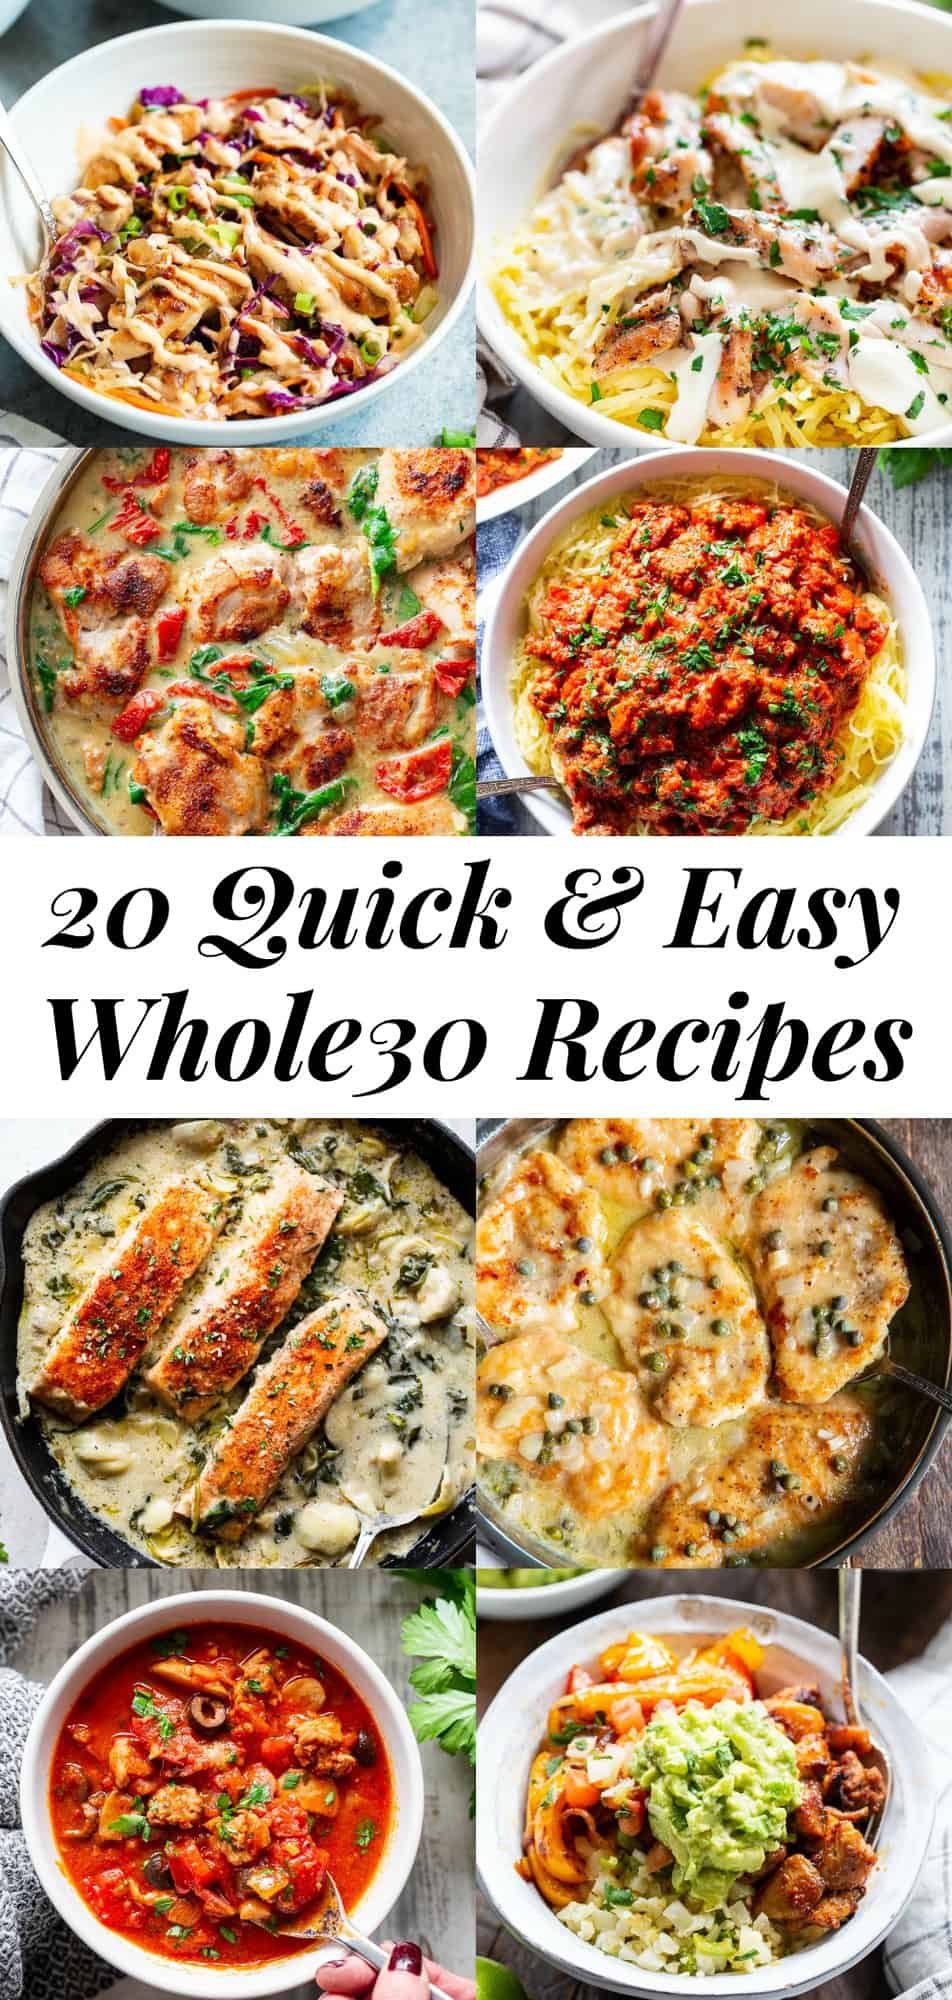 These 20 quick and easy healthy dinners are sure to make everyone in the family happy!  Each recipe is paleo friendly, Whole30 compliant, low carb, and ready from start to finish in 30 minutes or less.  If you're short on time you need these fast, healthy and super tasty dinner recipes in your life! #paleo #whole30 #keto #lowcarb #cleaneating